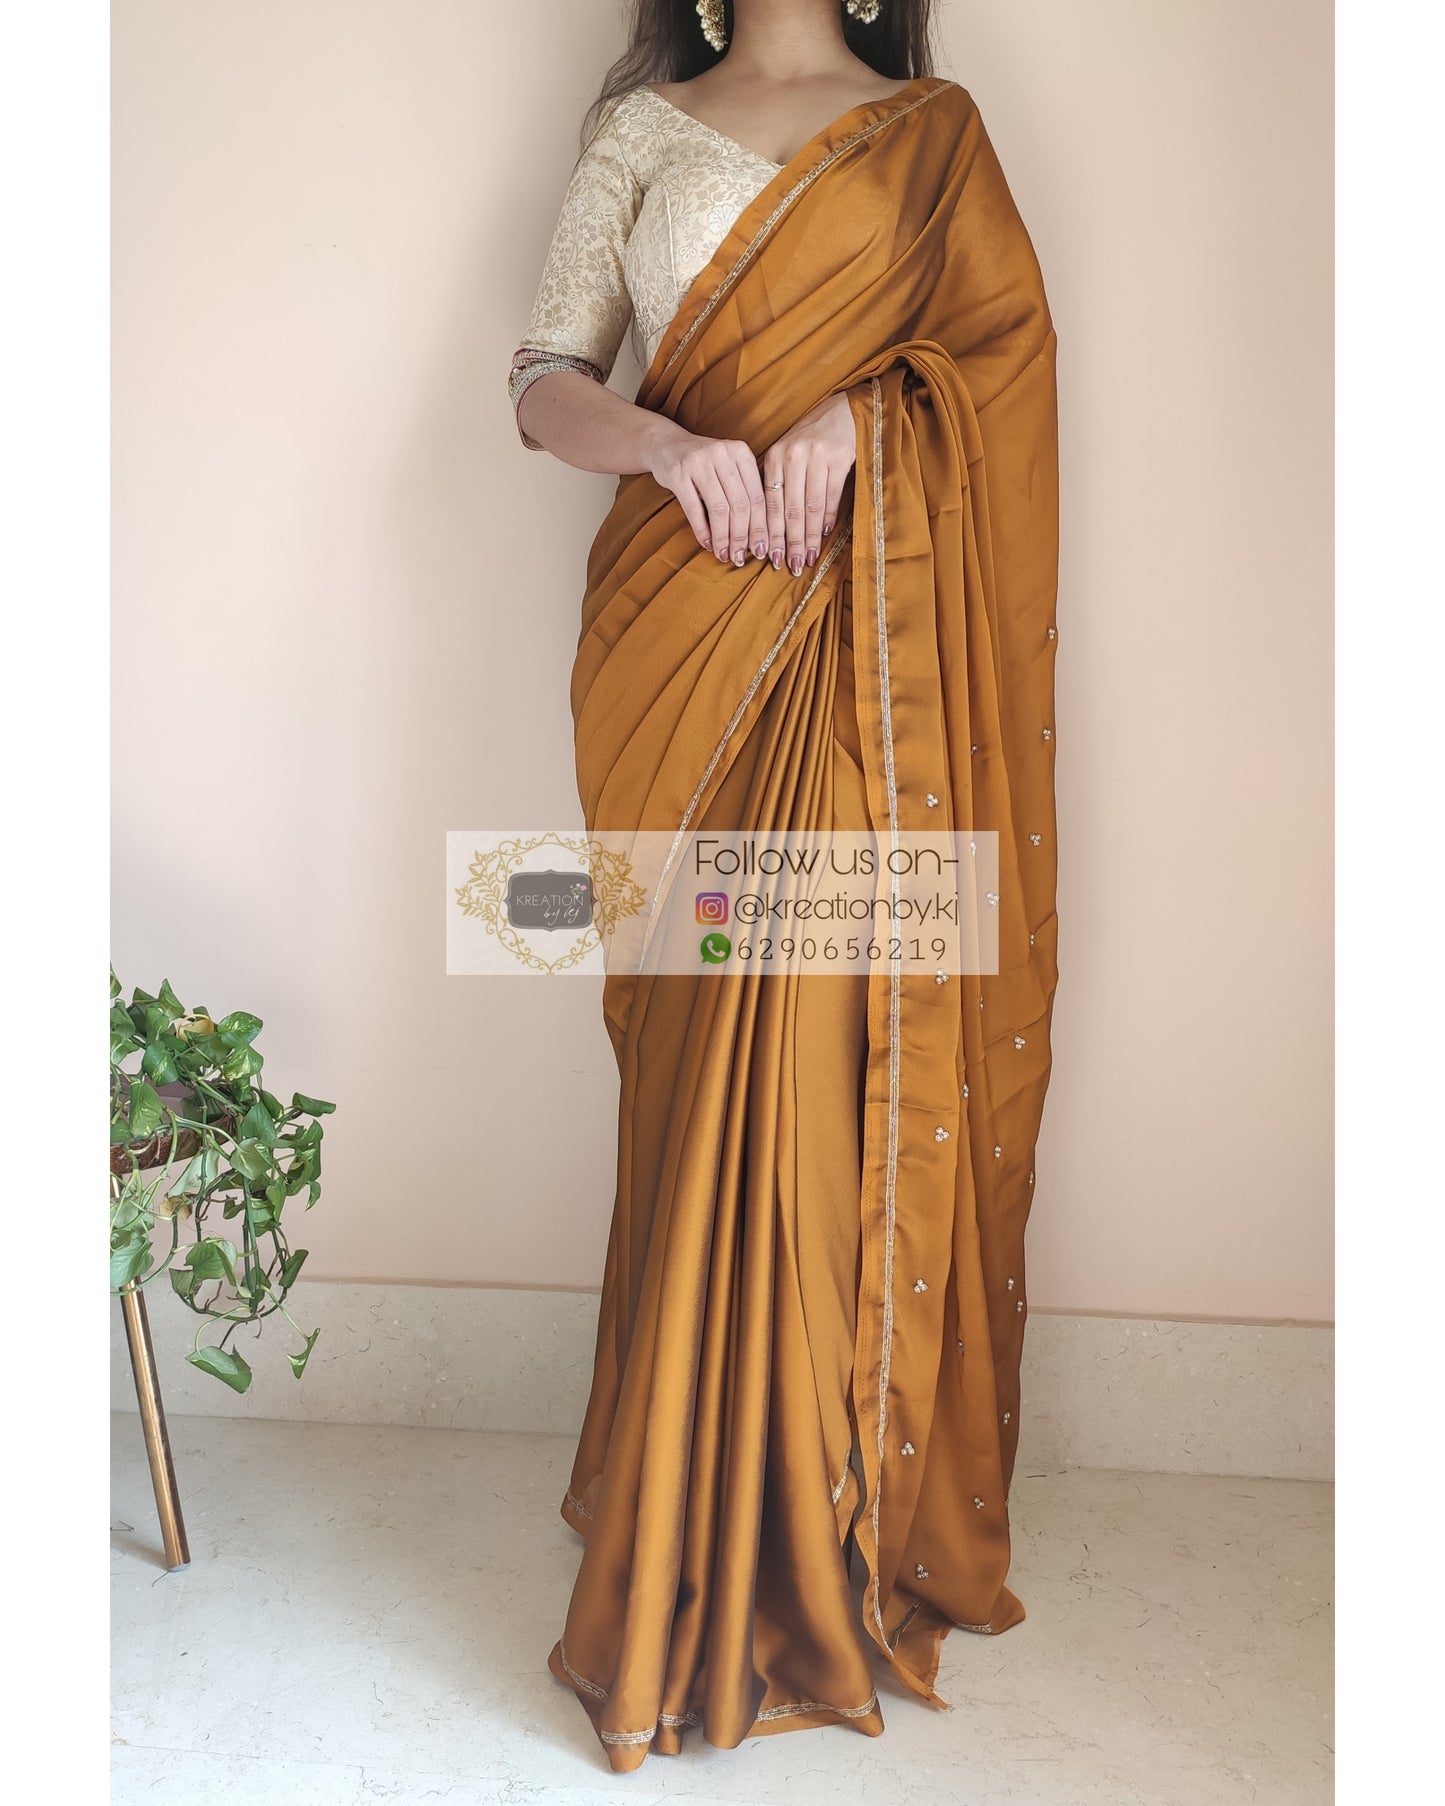 Buy Pick Any 1 Foil Work Silk Saree with Free Golden Necklace Set (FPS13)  Online at Best Price in India on Naaptol.com